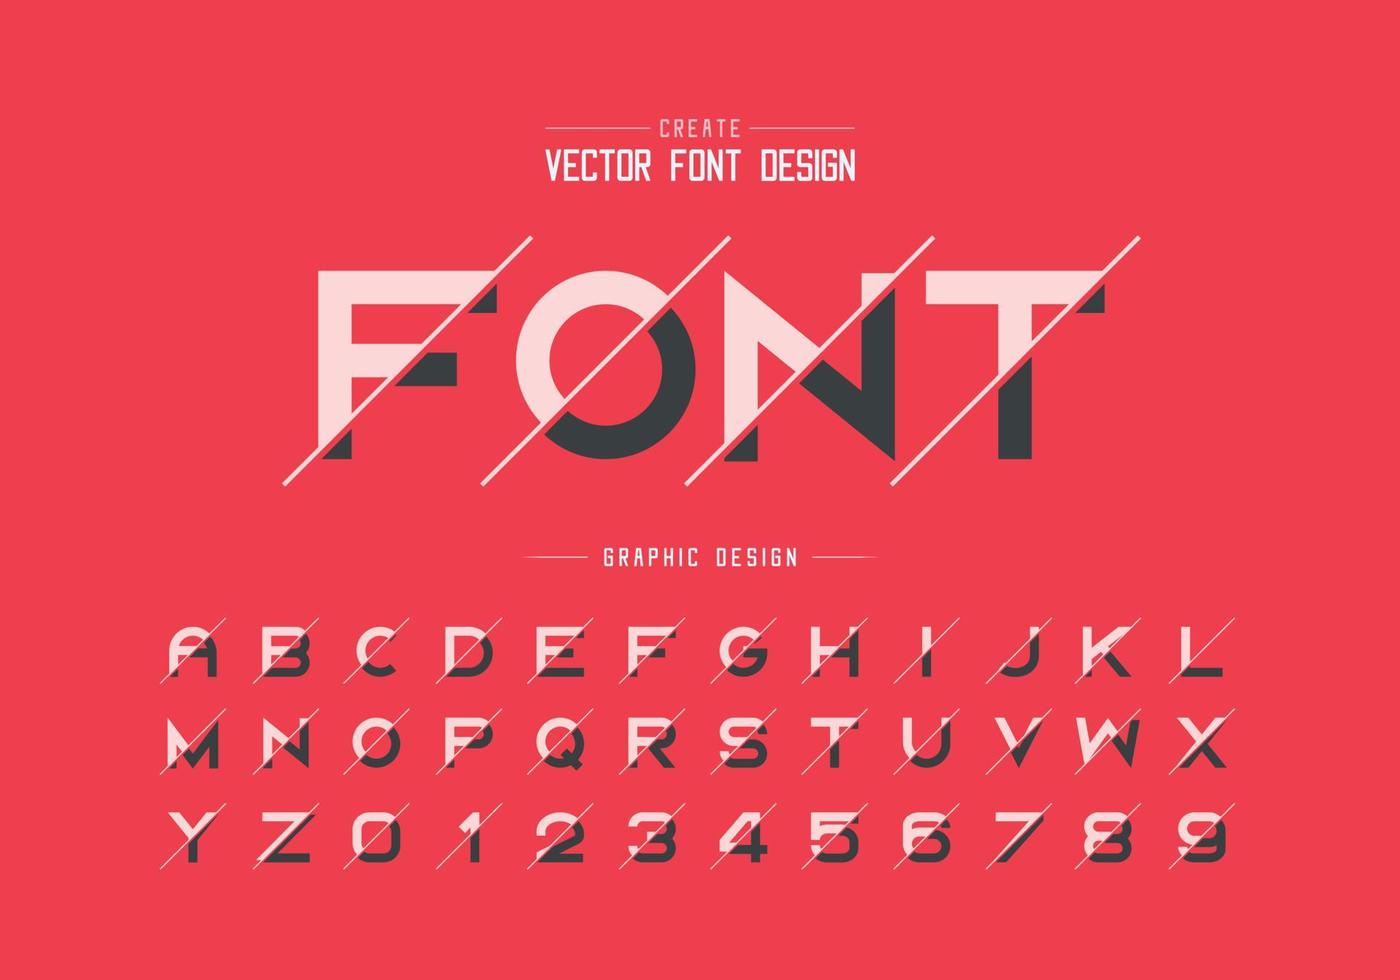 Sliced font and alphabet vector, Bold typeface letter and number design, Graphic text on background vector